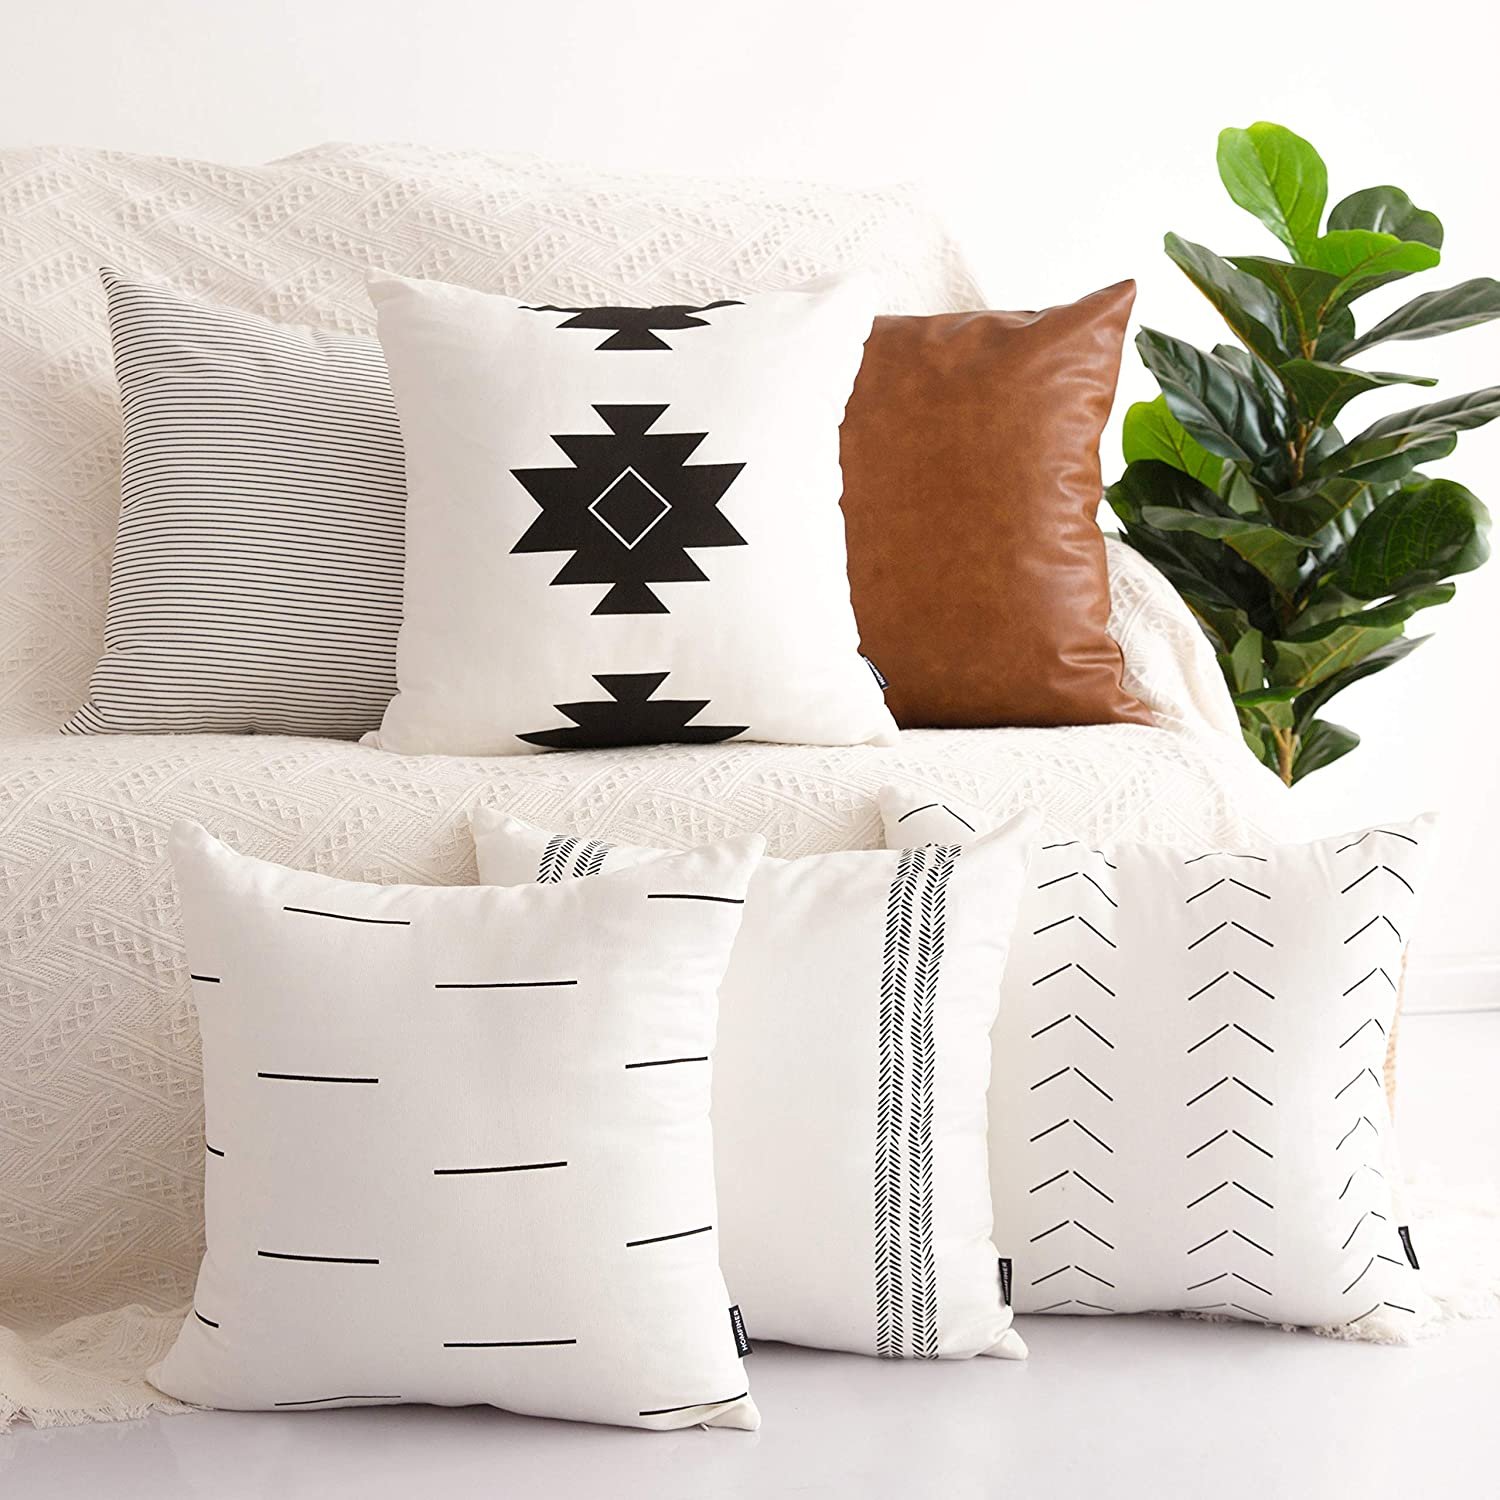 Set of 6 Pillow Covers